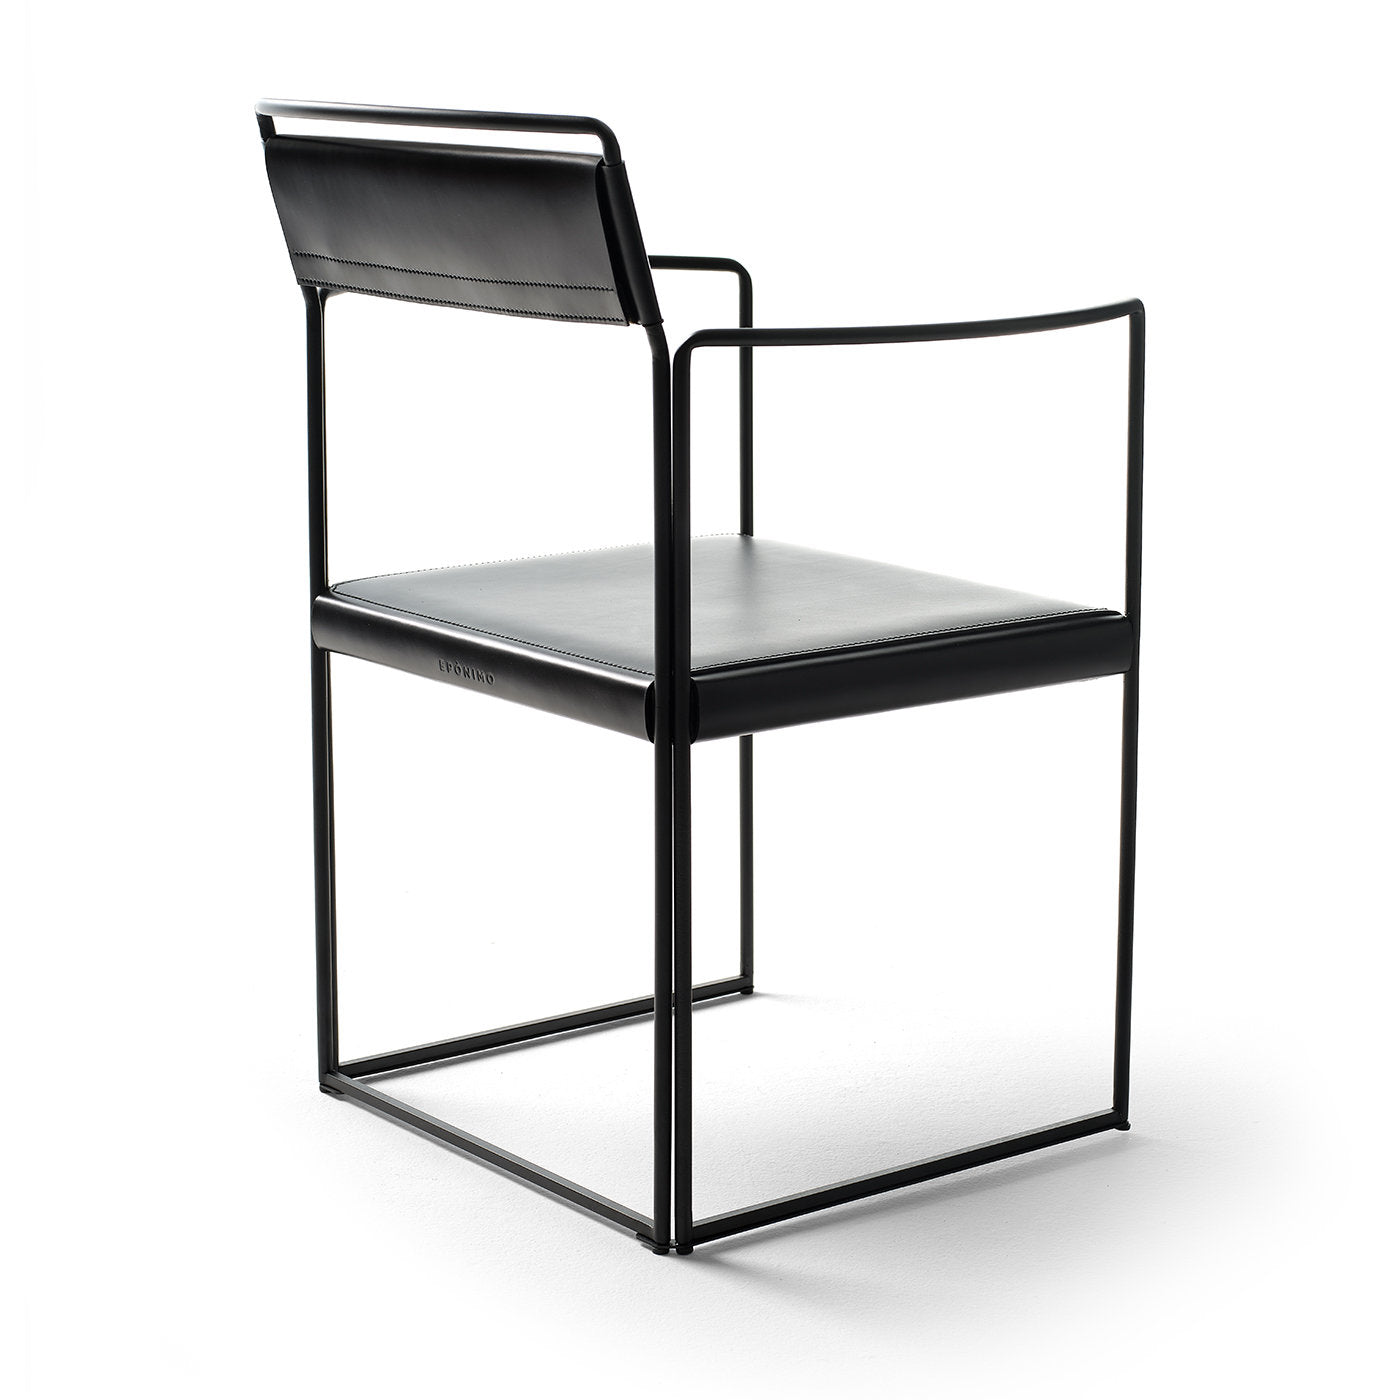 New Outline Black Chair with Armrests by Alberto Colzani - Alternative view 3